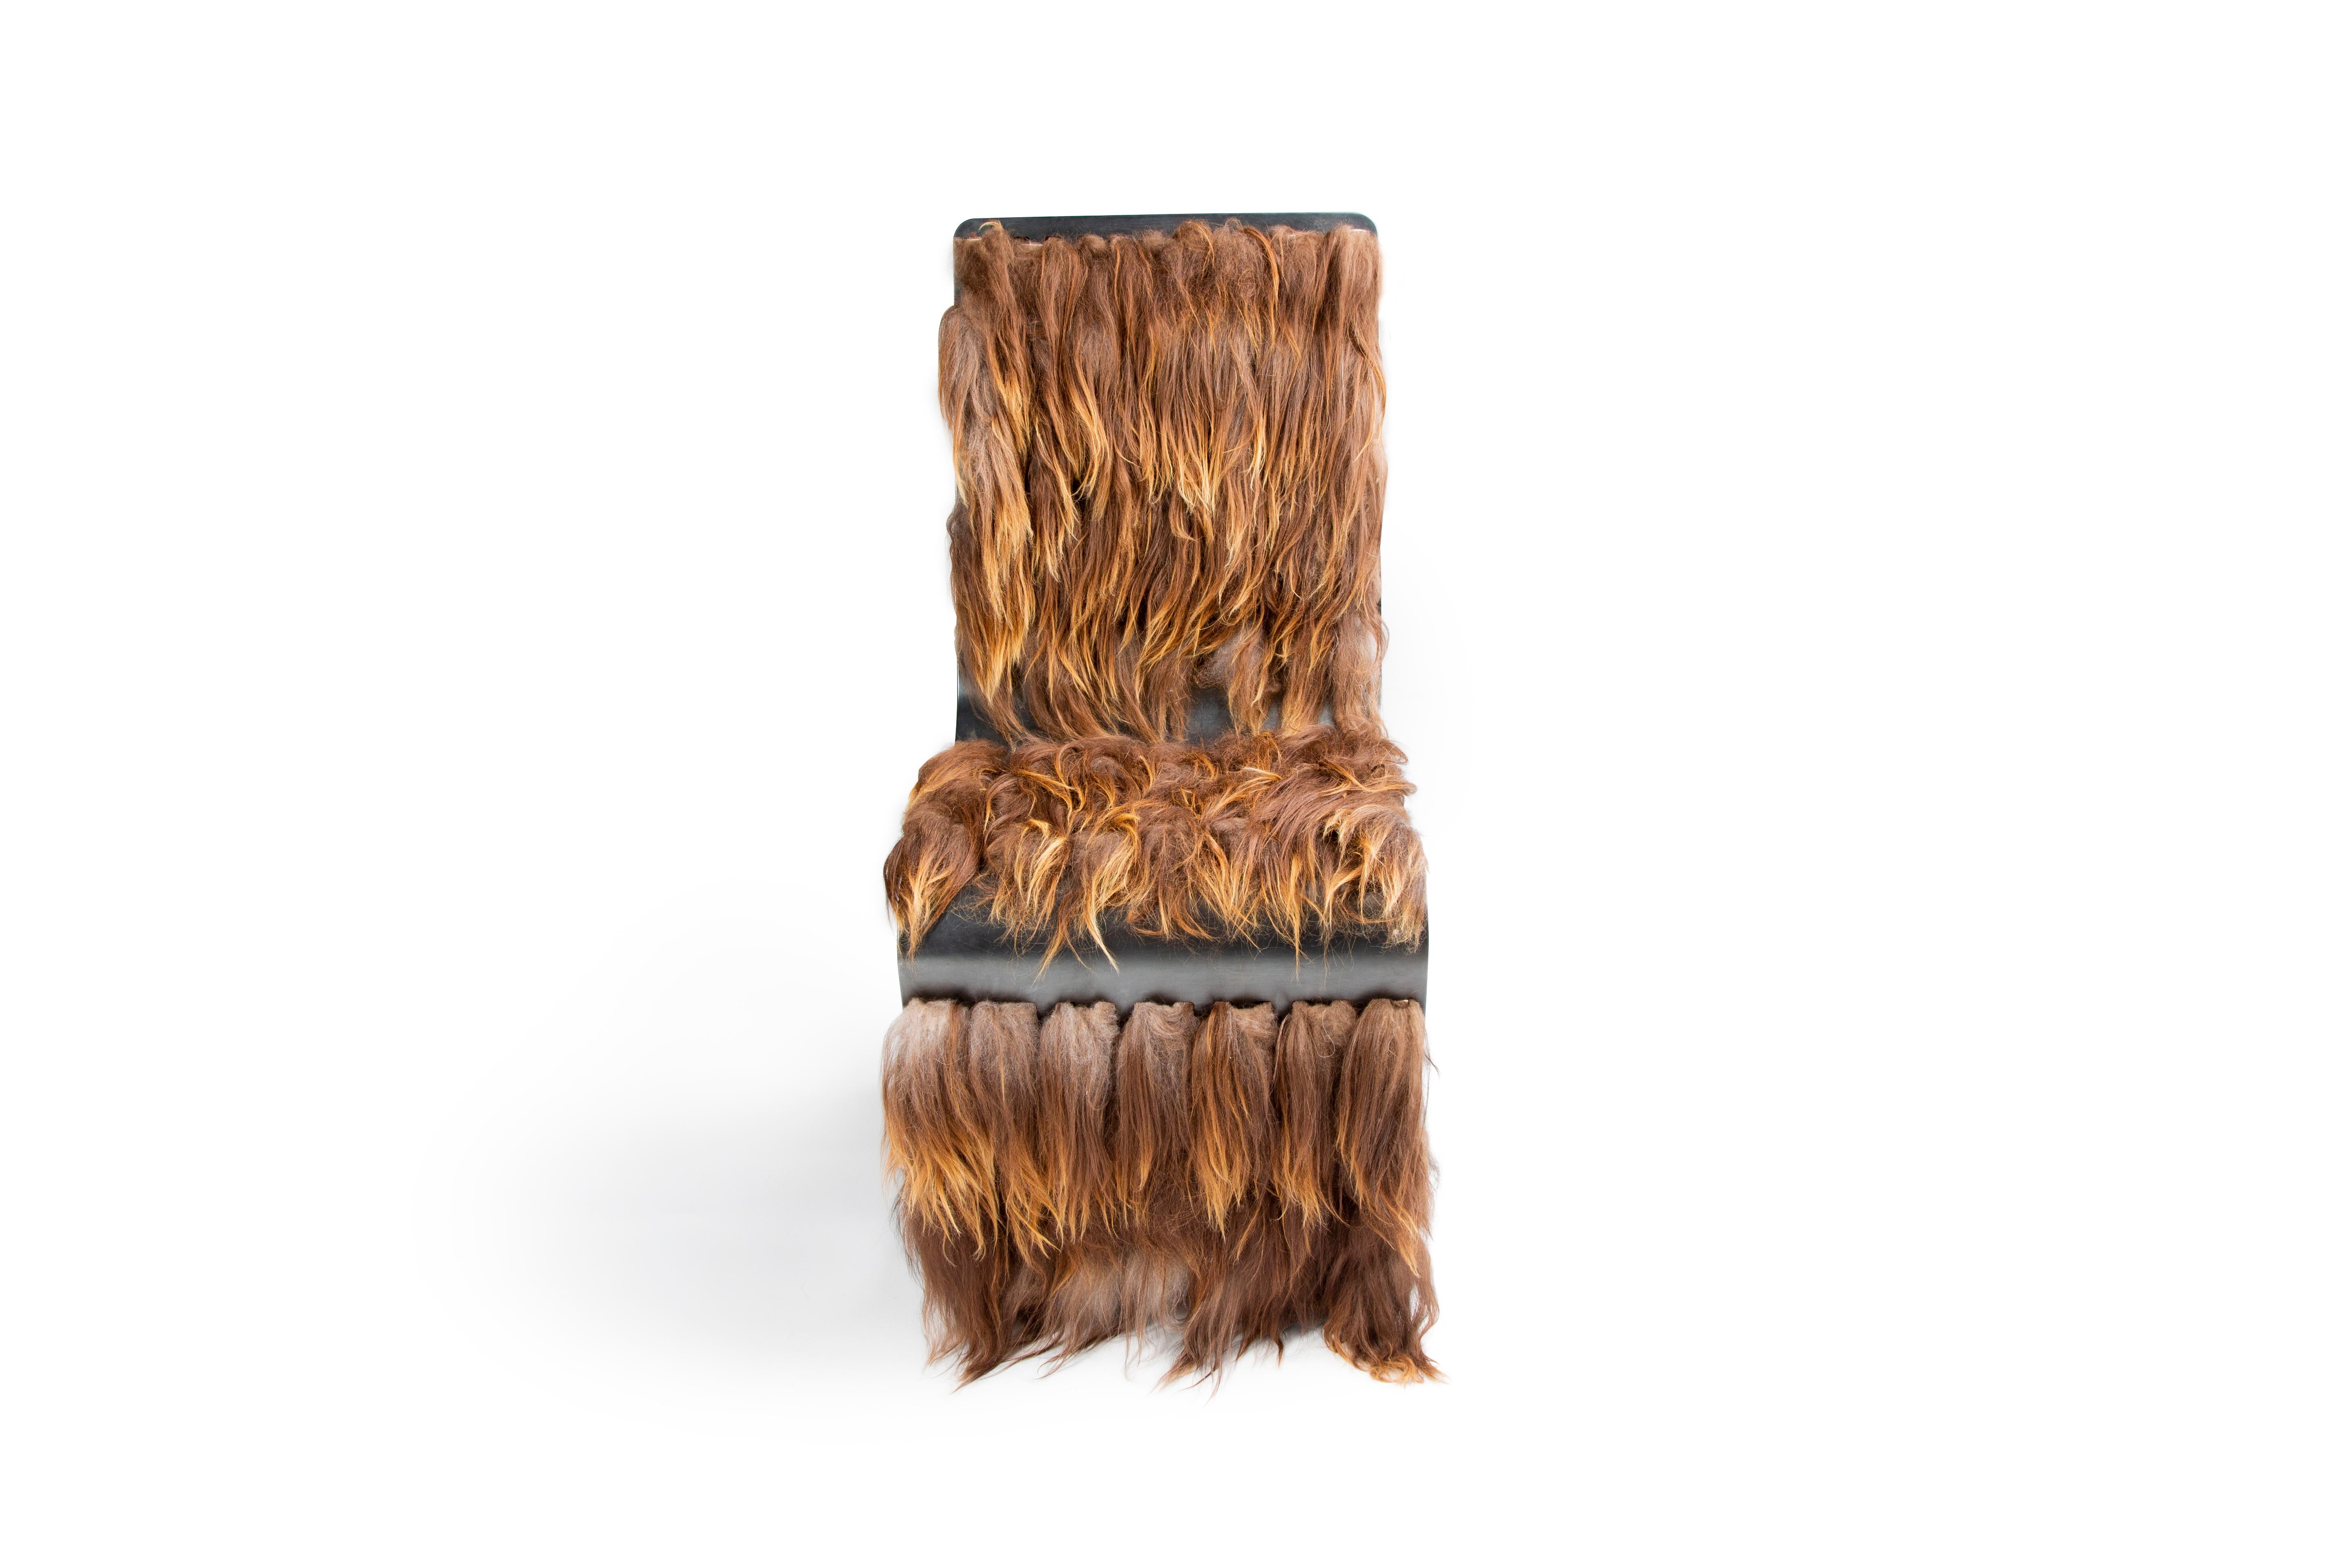 Star Wars fans will be talking! This steel chair weaves Icelandic fur into the intricate steel cutouts to make a statement piece for any contemporary environment. Handmade in Bozeman, Montana, this eclectic piece offers comfort, durability and